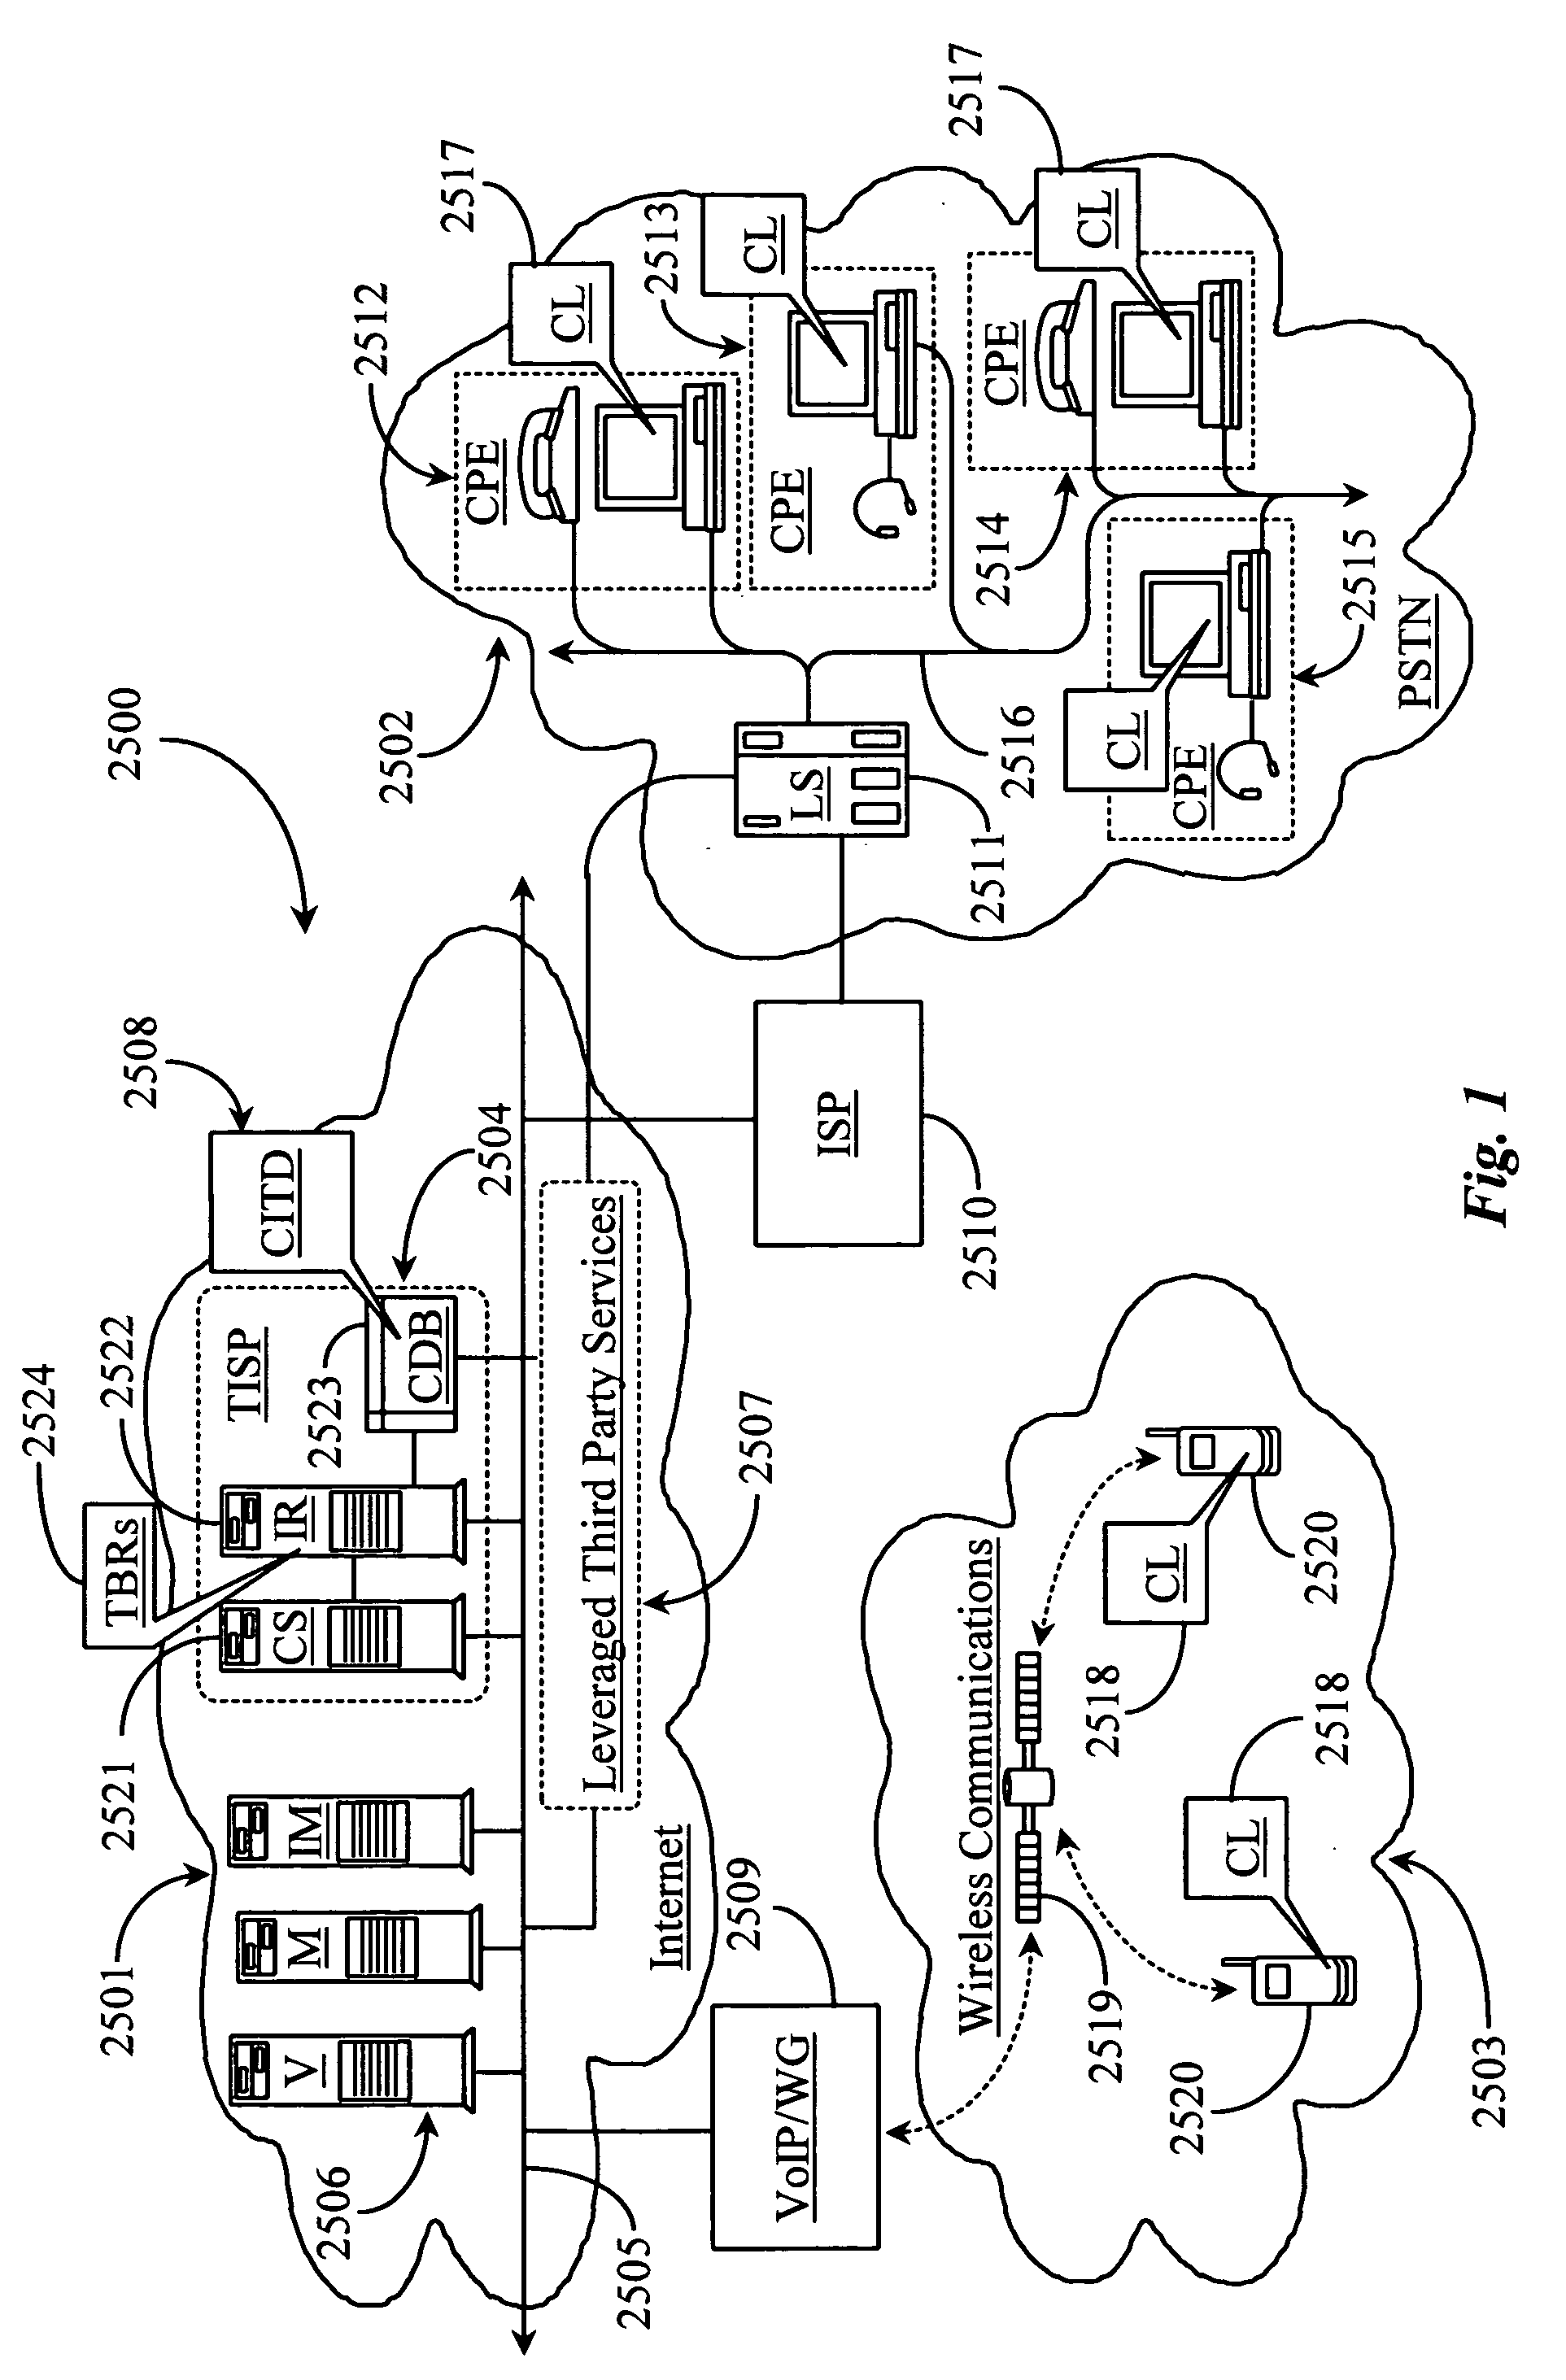 Methods and apparatus for enabling a dynamic network of interactors according to personal trust levels between interactors